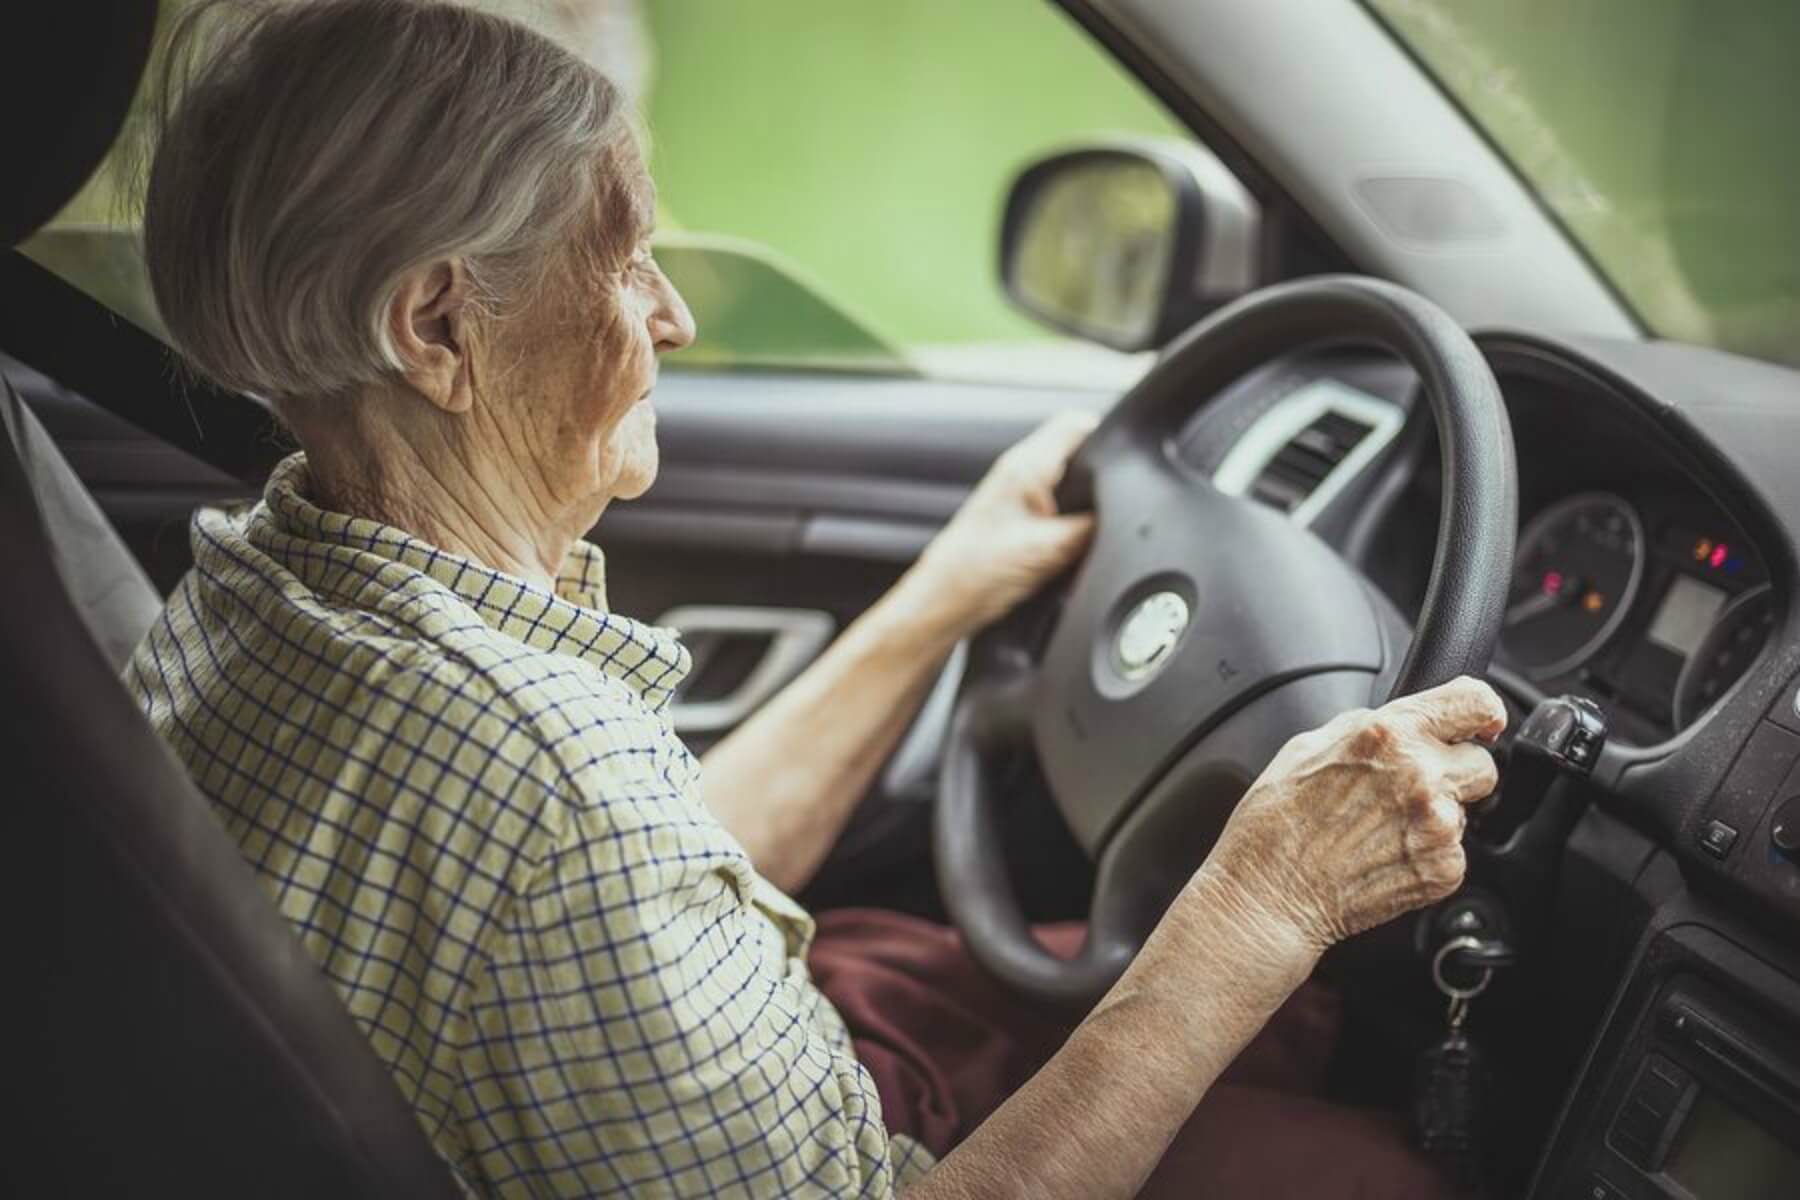 Senior Care in Spanish Fort AL: Stopping Driving While Cognitively Challenged